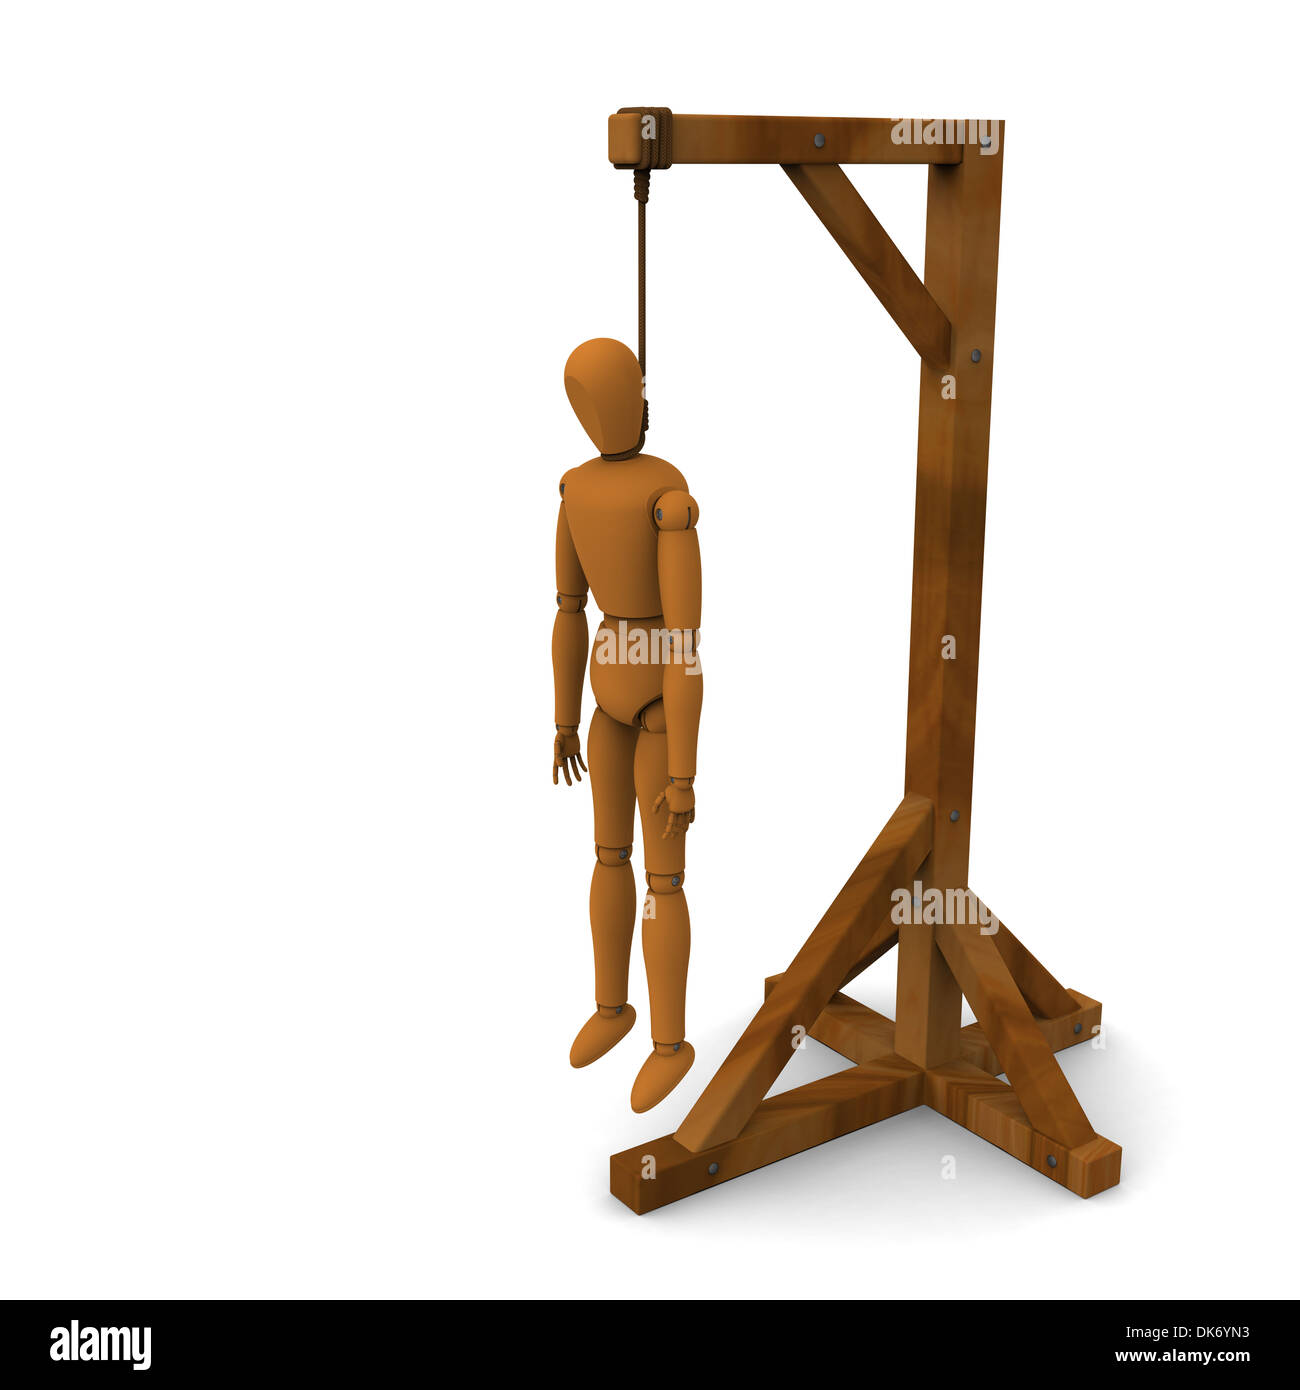 3D model of puppet hung on wooden post Stock Photo